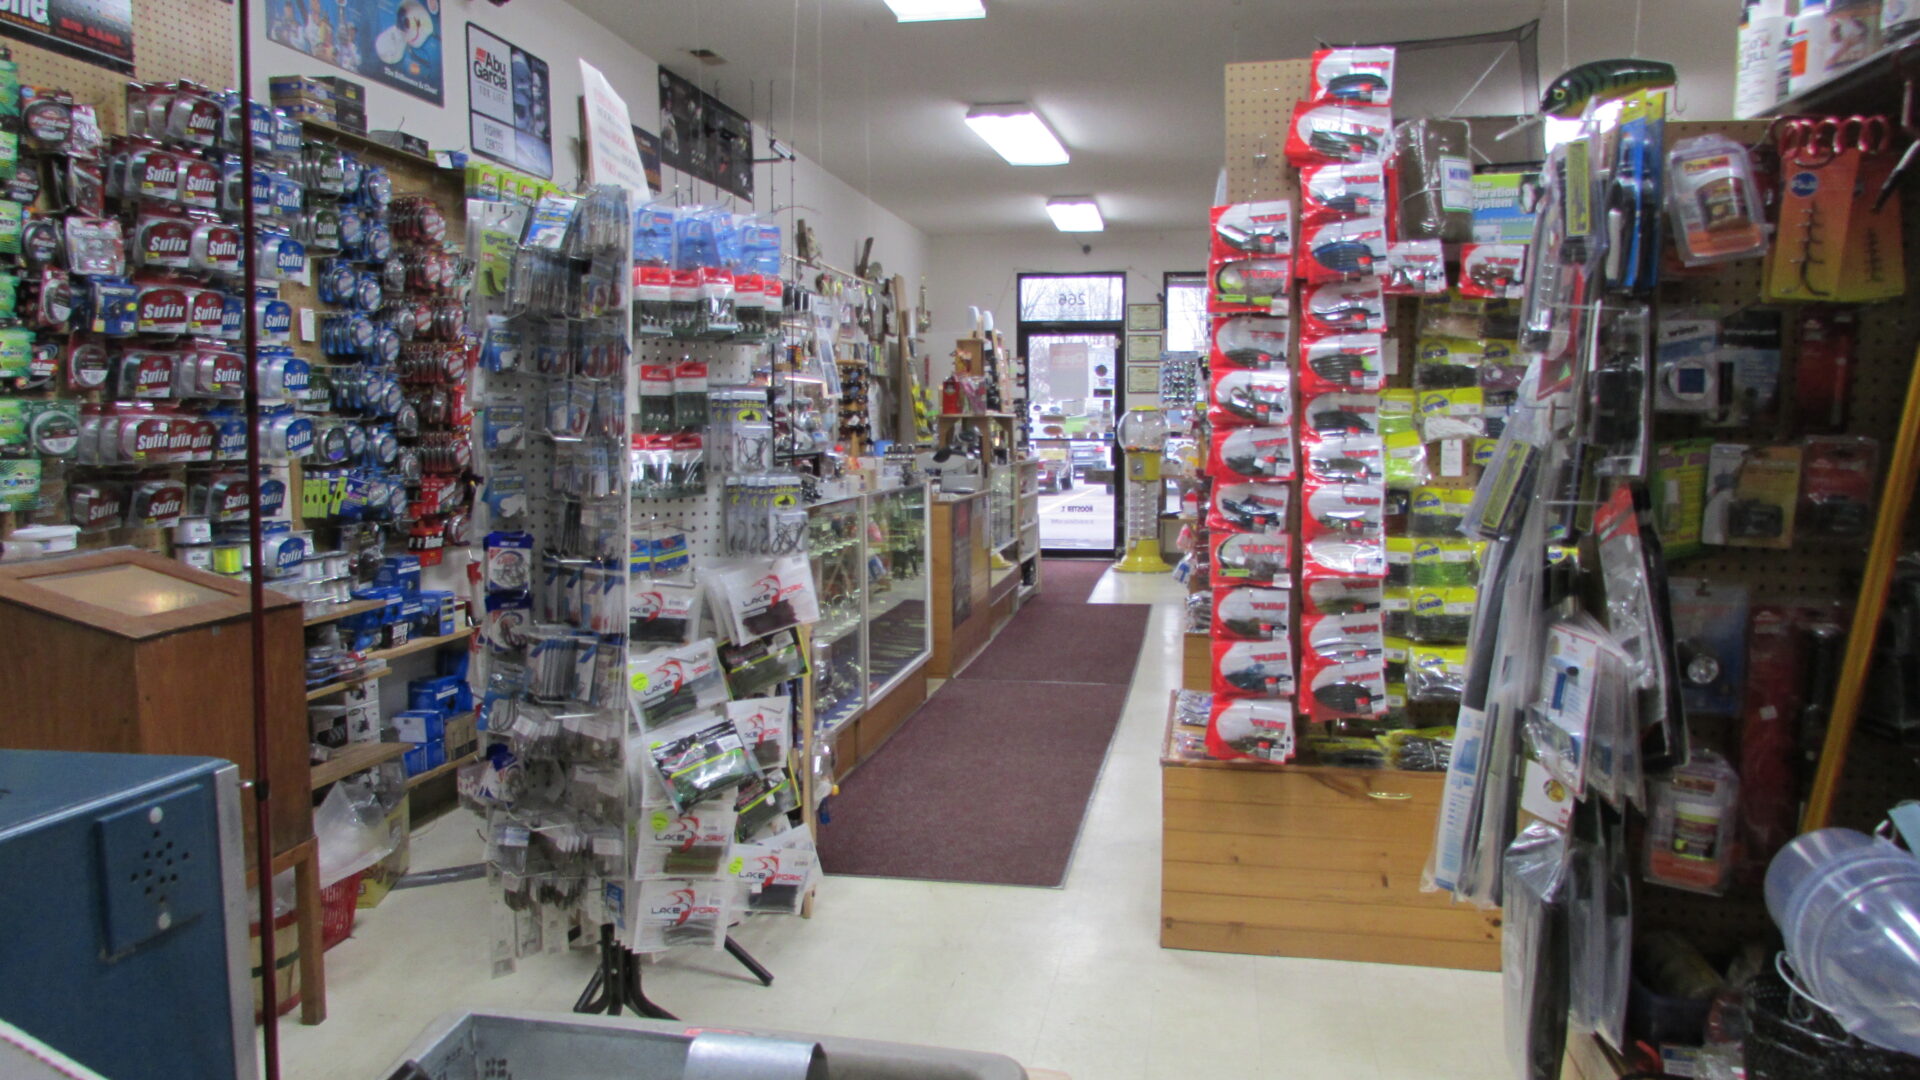 A close-up inside the store with stock